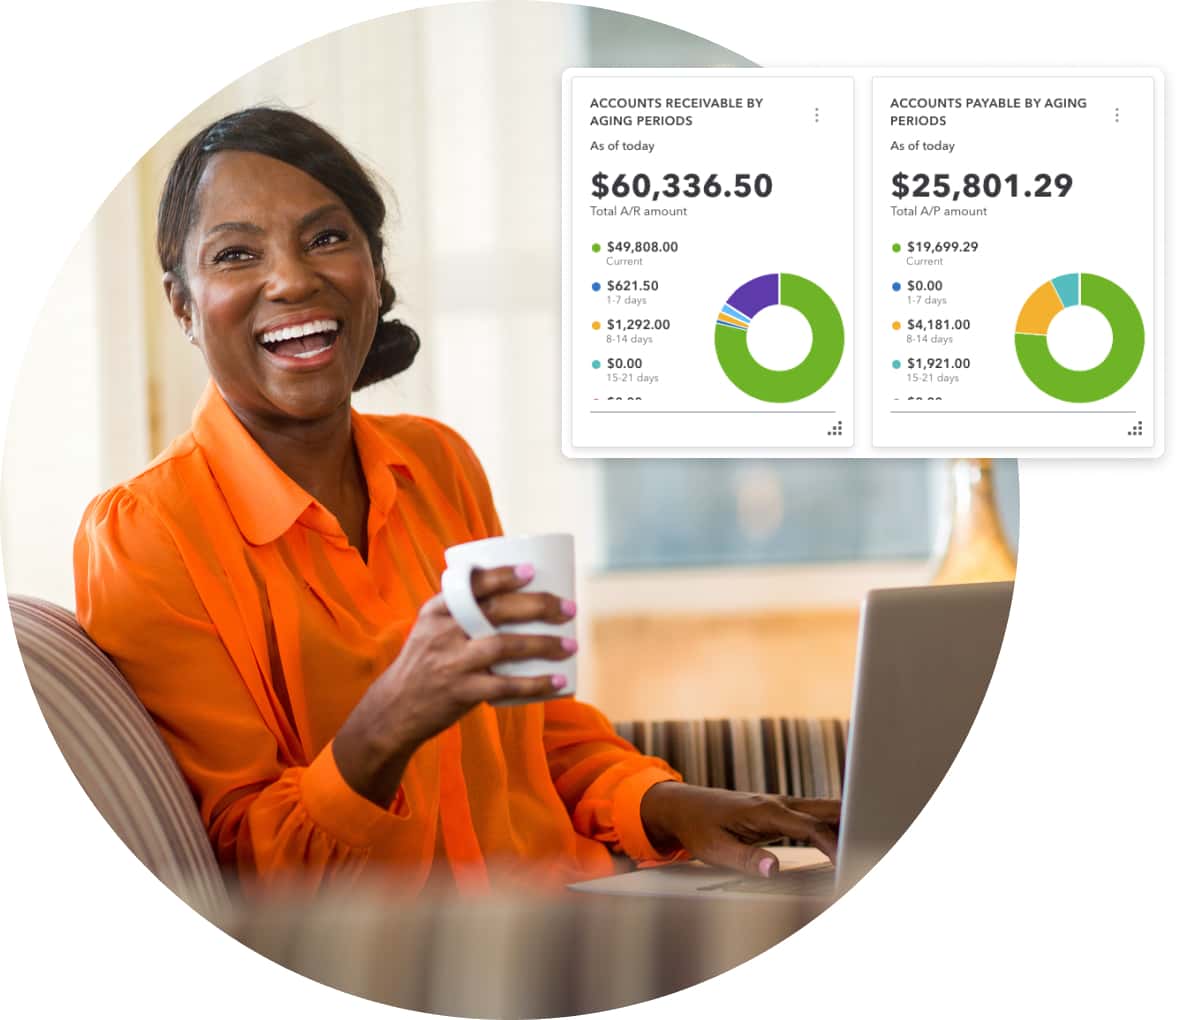 Smiling woman in orange blouse with a QuickBooks Online Advanced overlay showing Accounts receivable by aging periods